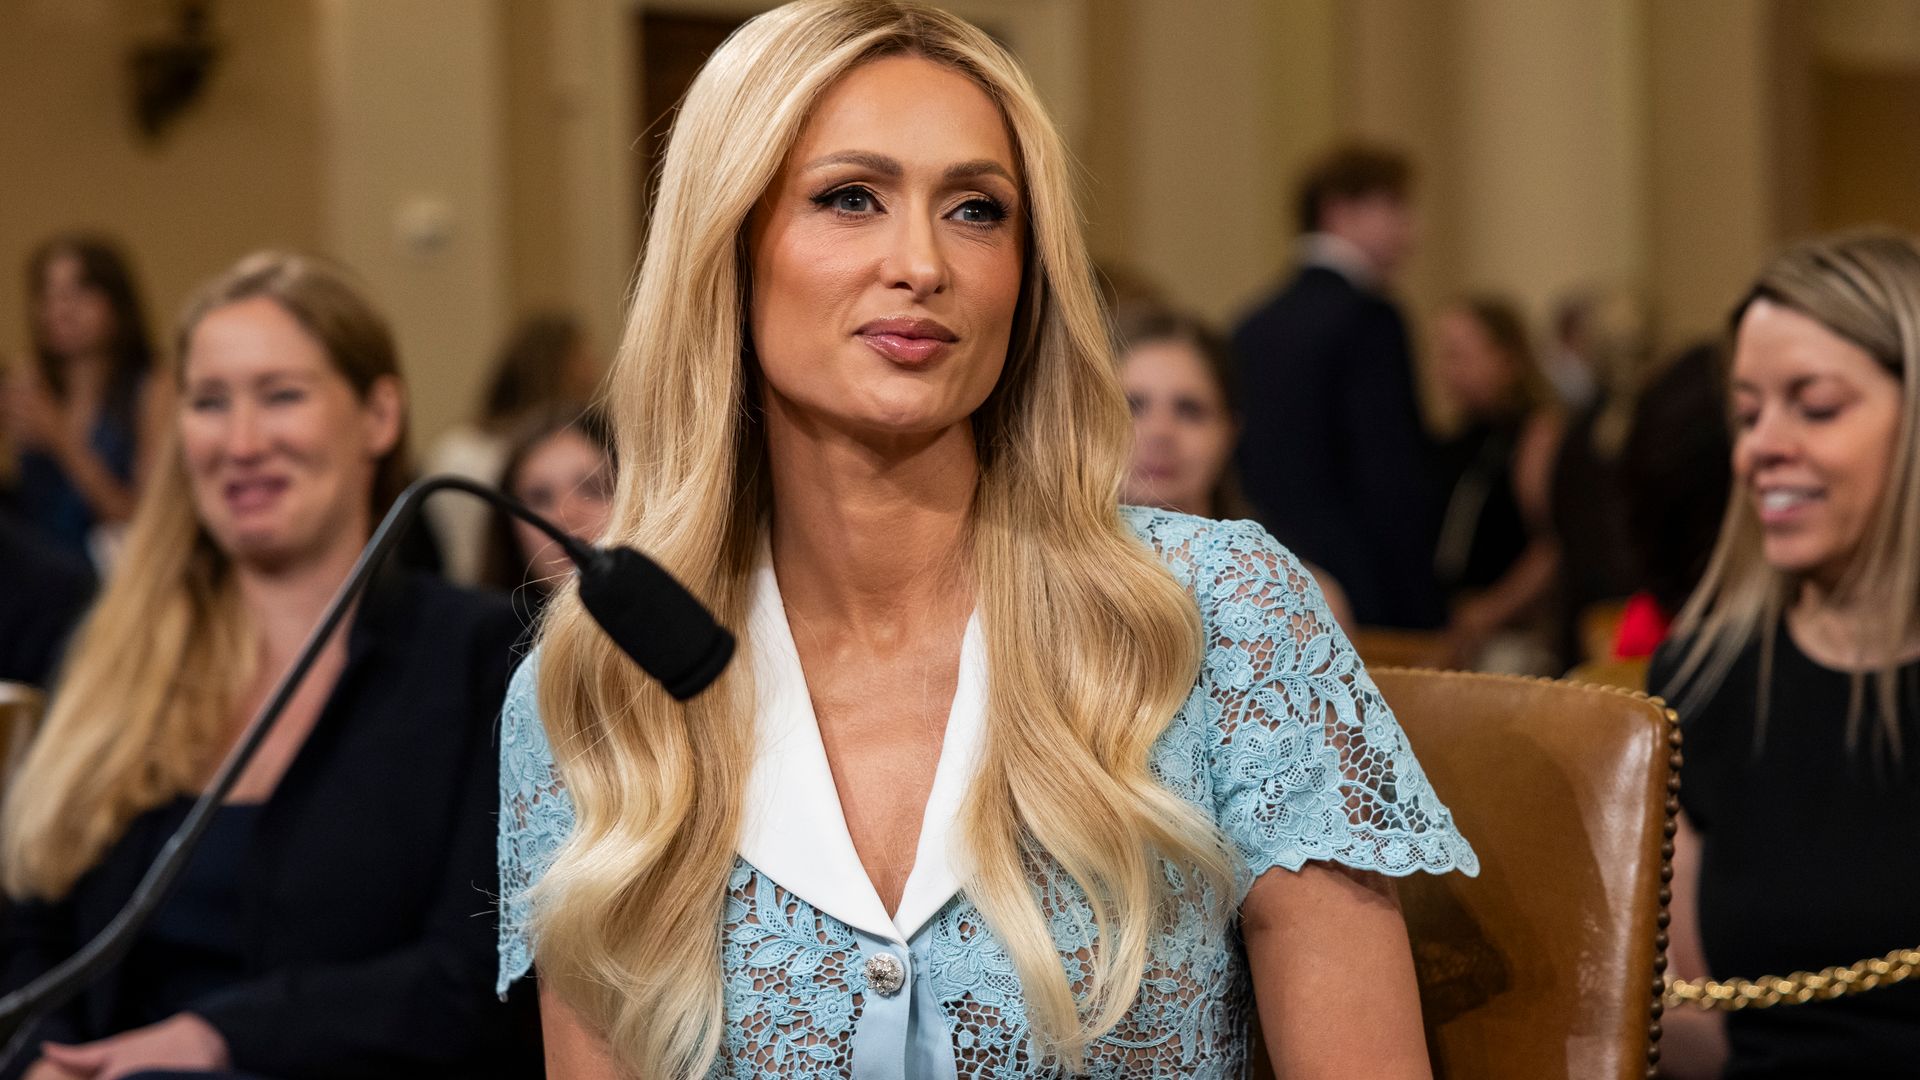 Paris Hilton appeared on Capitol Hill to advocate for foster children Wednesday, June 26.